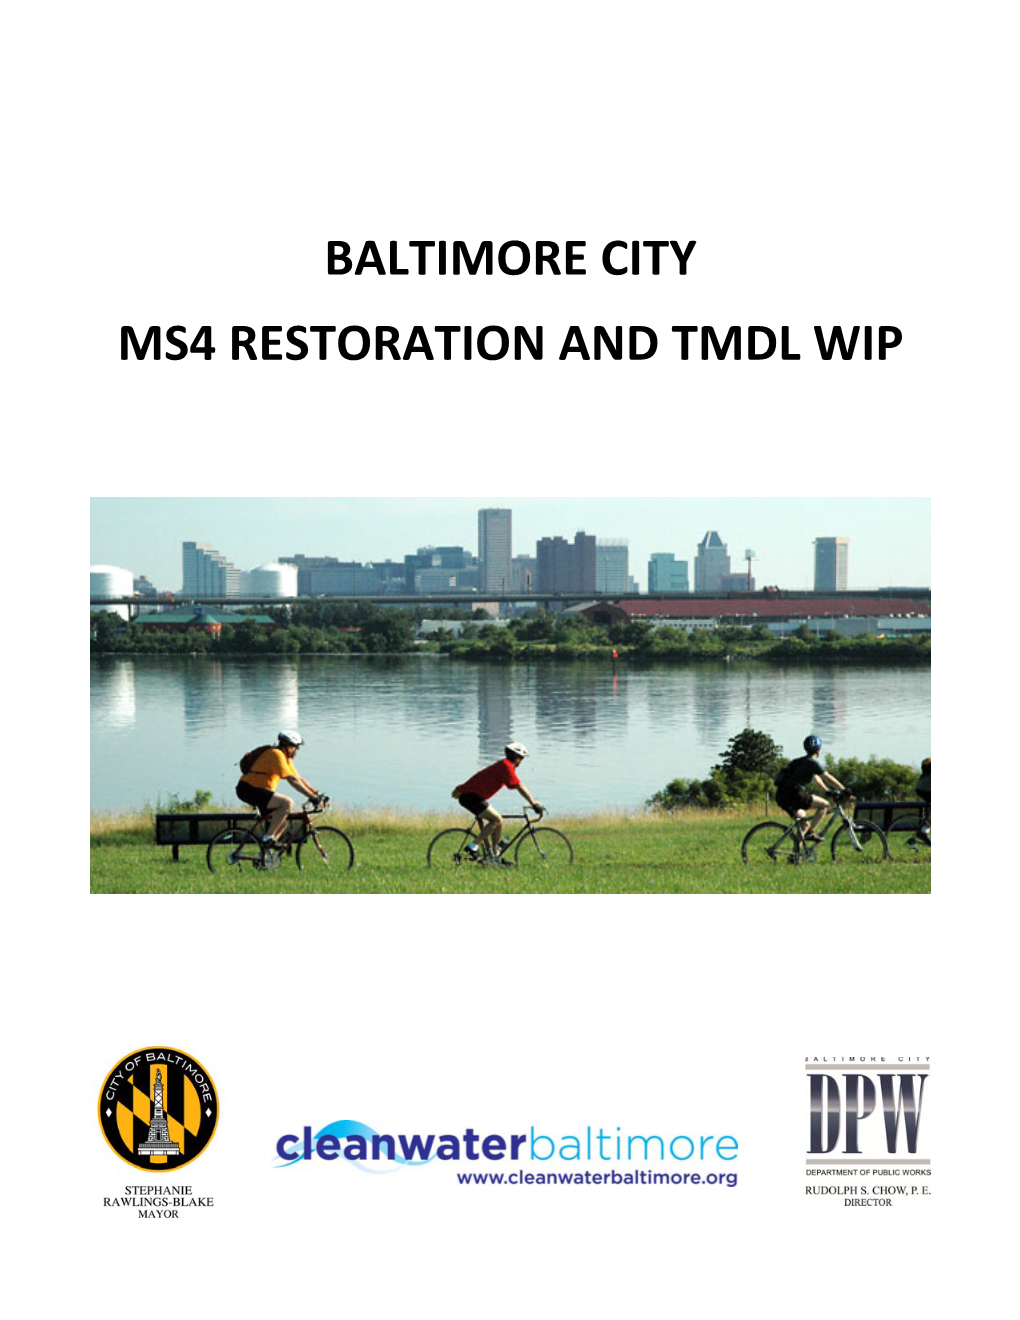 Baltimore City Ms4 Restoration and Tmdl Wip